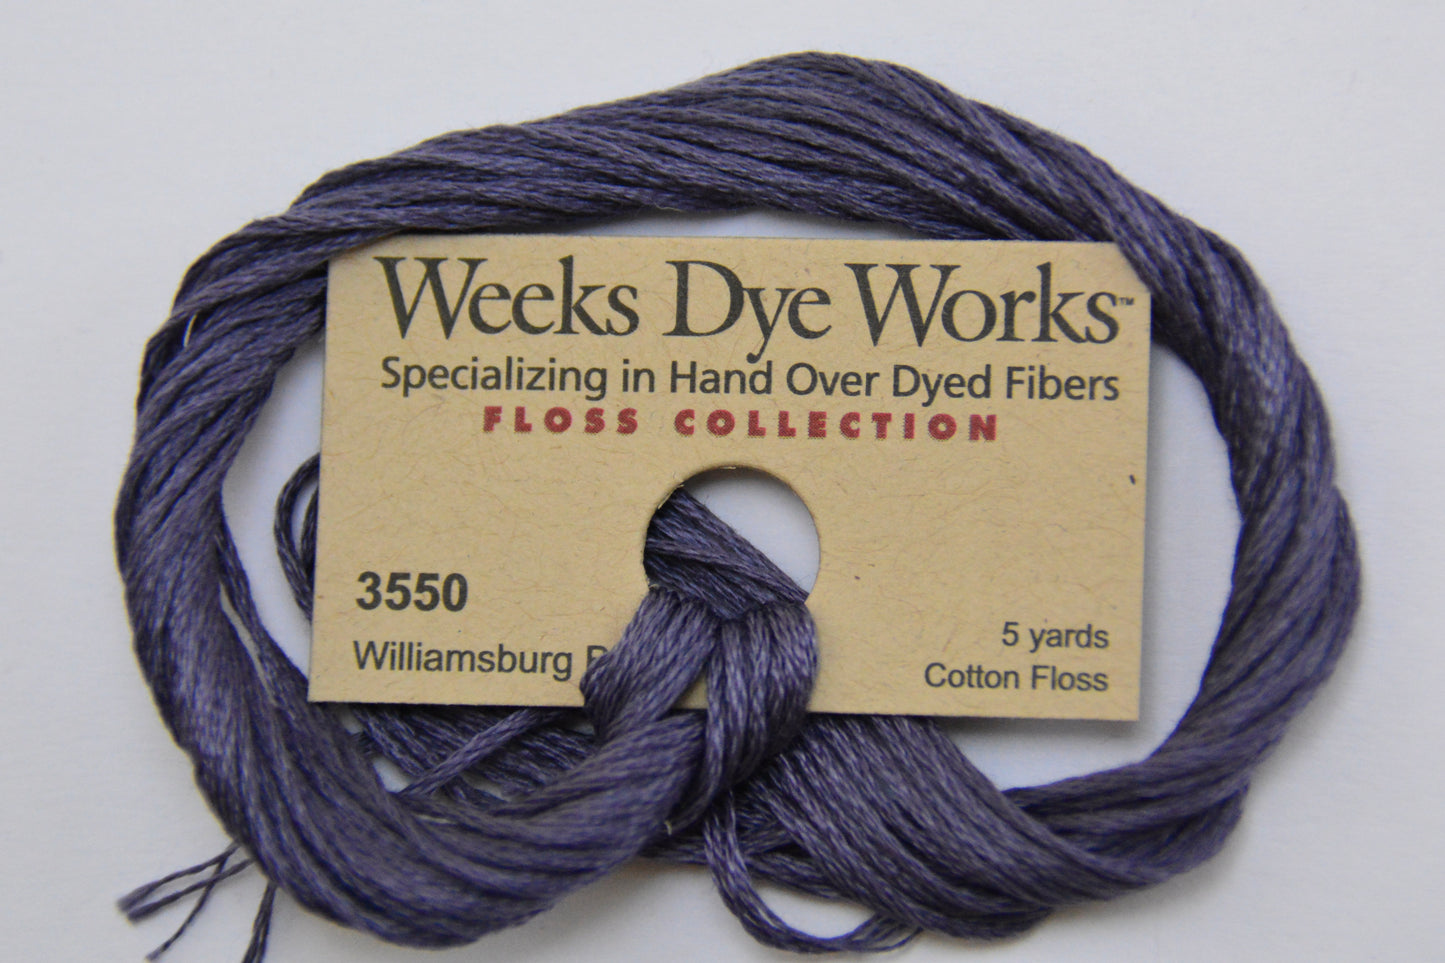 Williamsburg Blue 3550 Weeks Dye Works 6-Strand Hand-Dyed Embroidery Floss